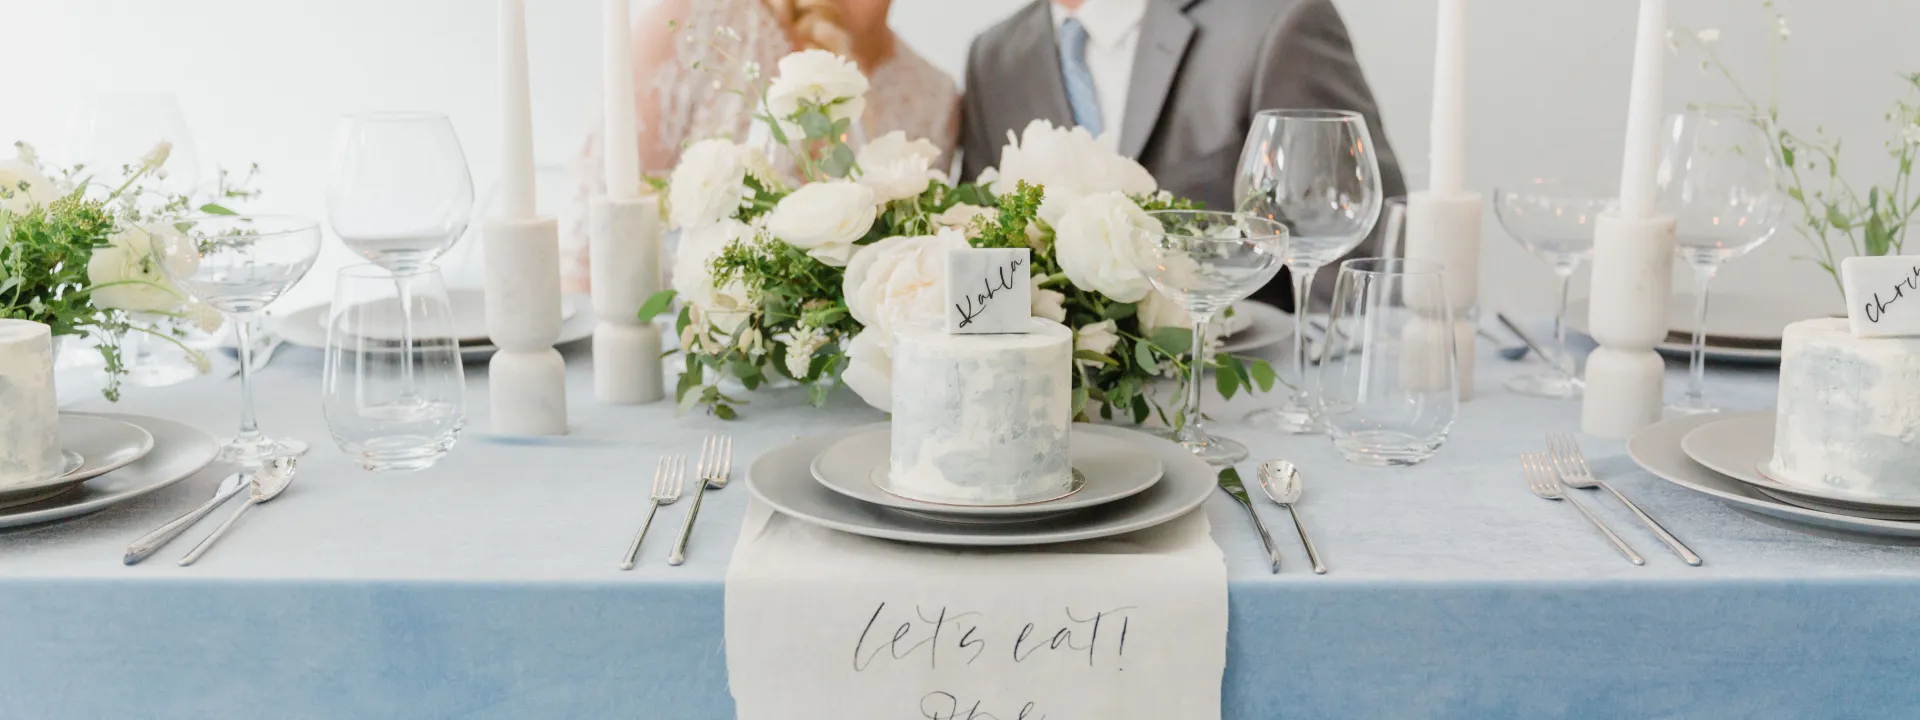 A styled shoot featuring classic blue linens and desserts. Pantone Color of the Year 2020.